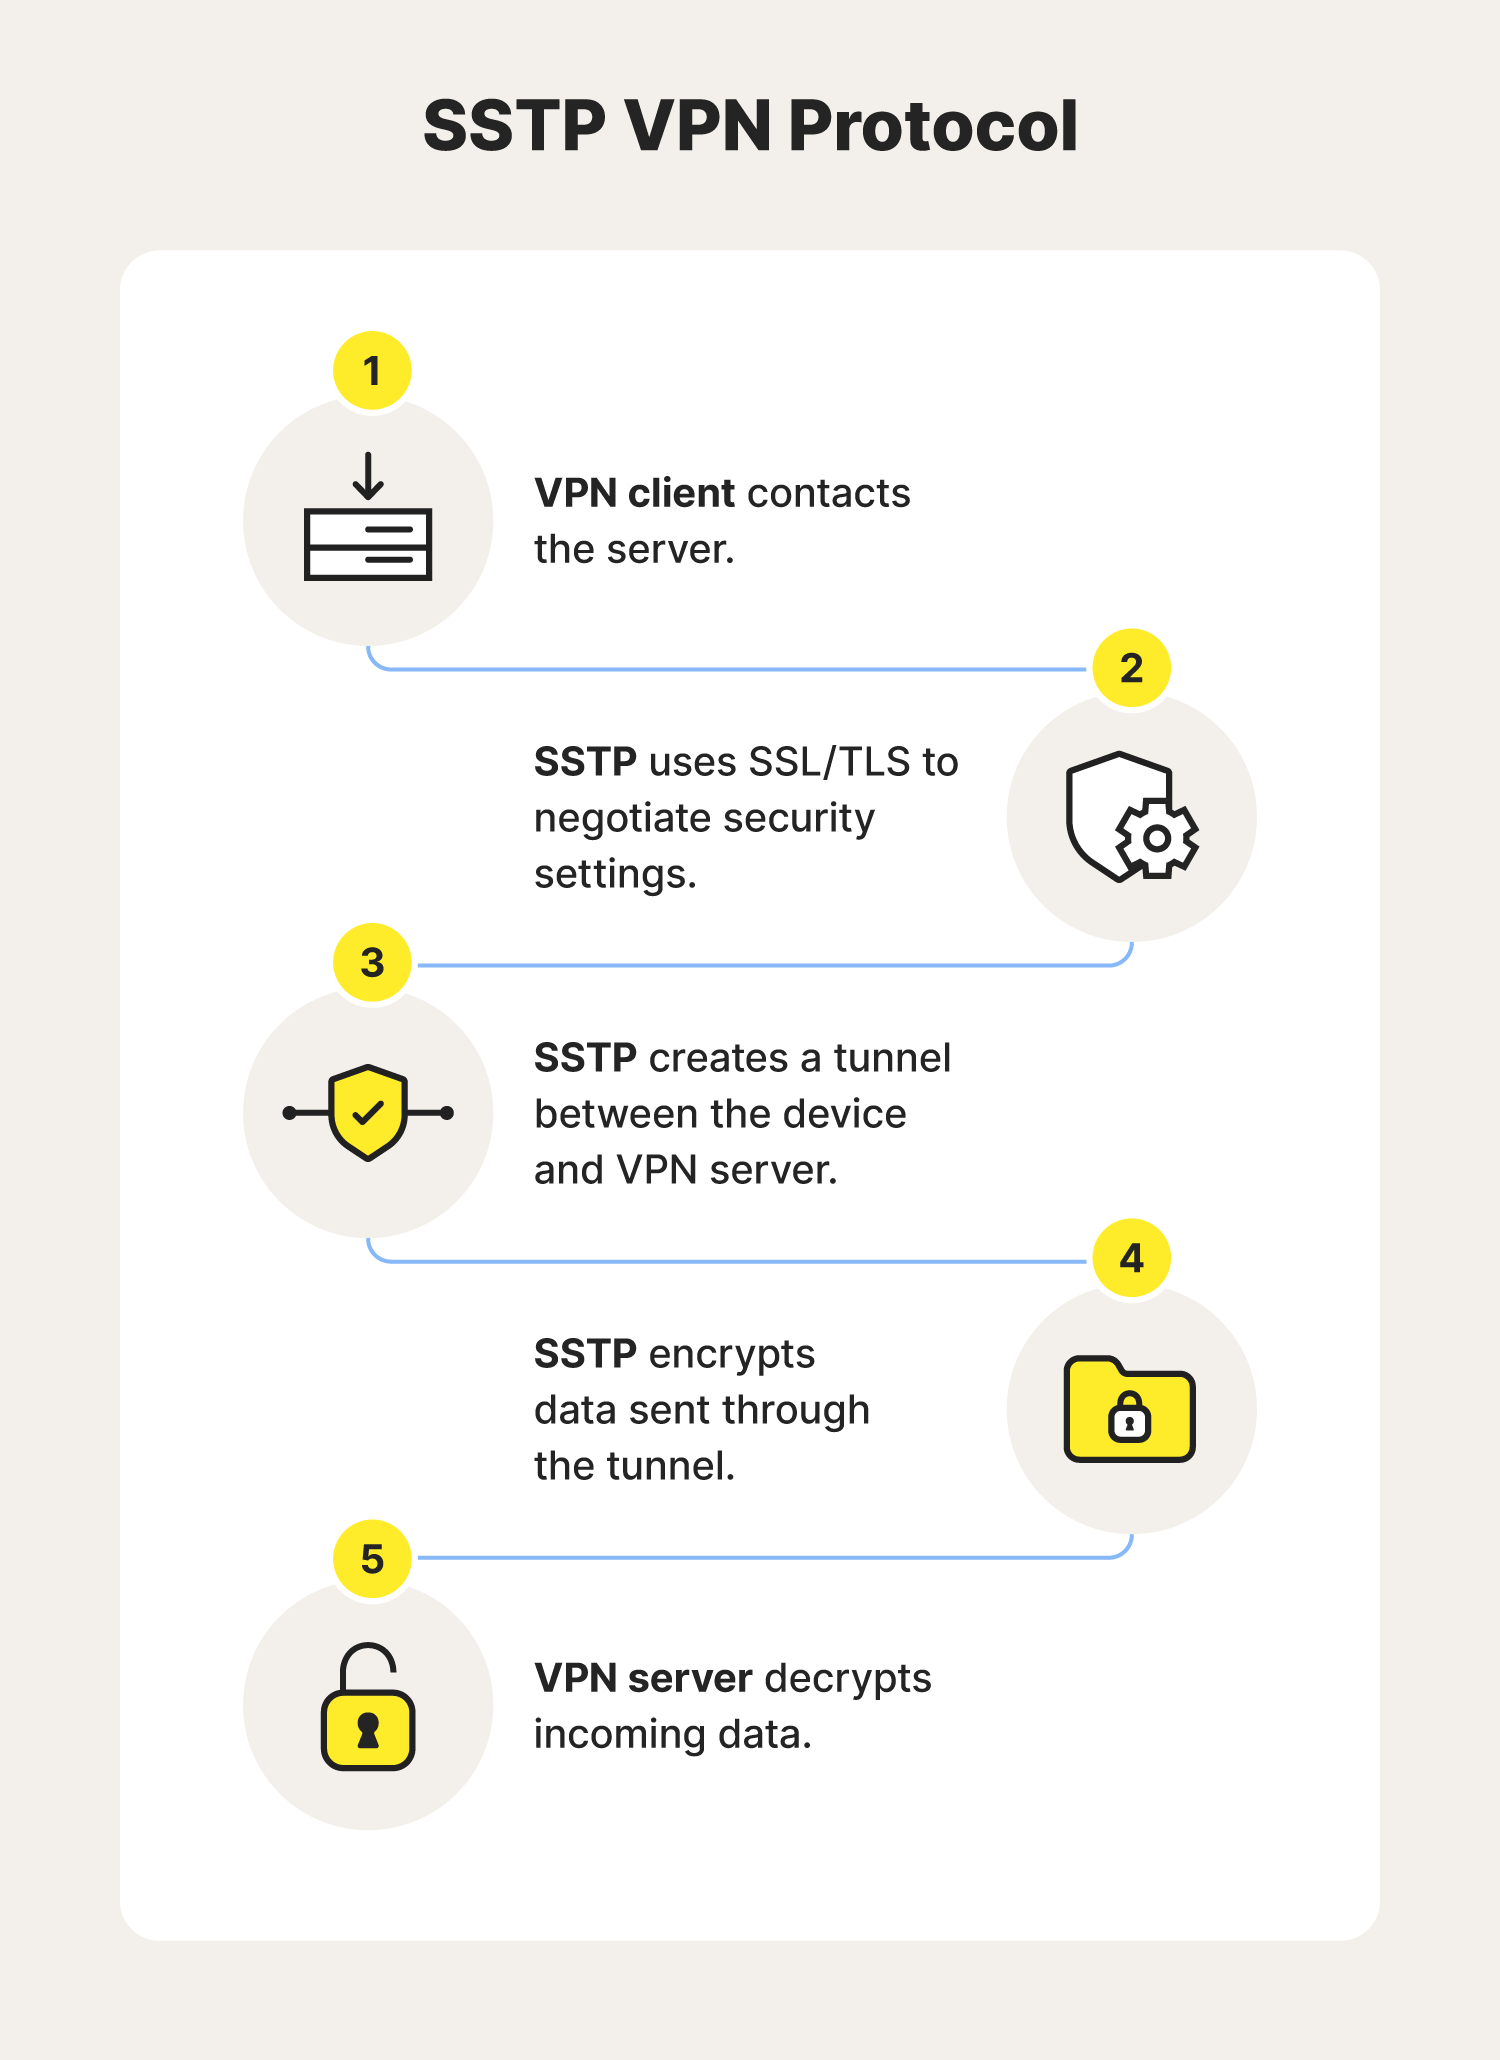 An explanation of how the SSTP VPN protocol works.